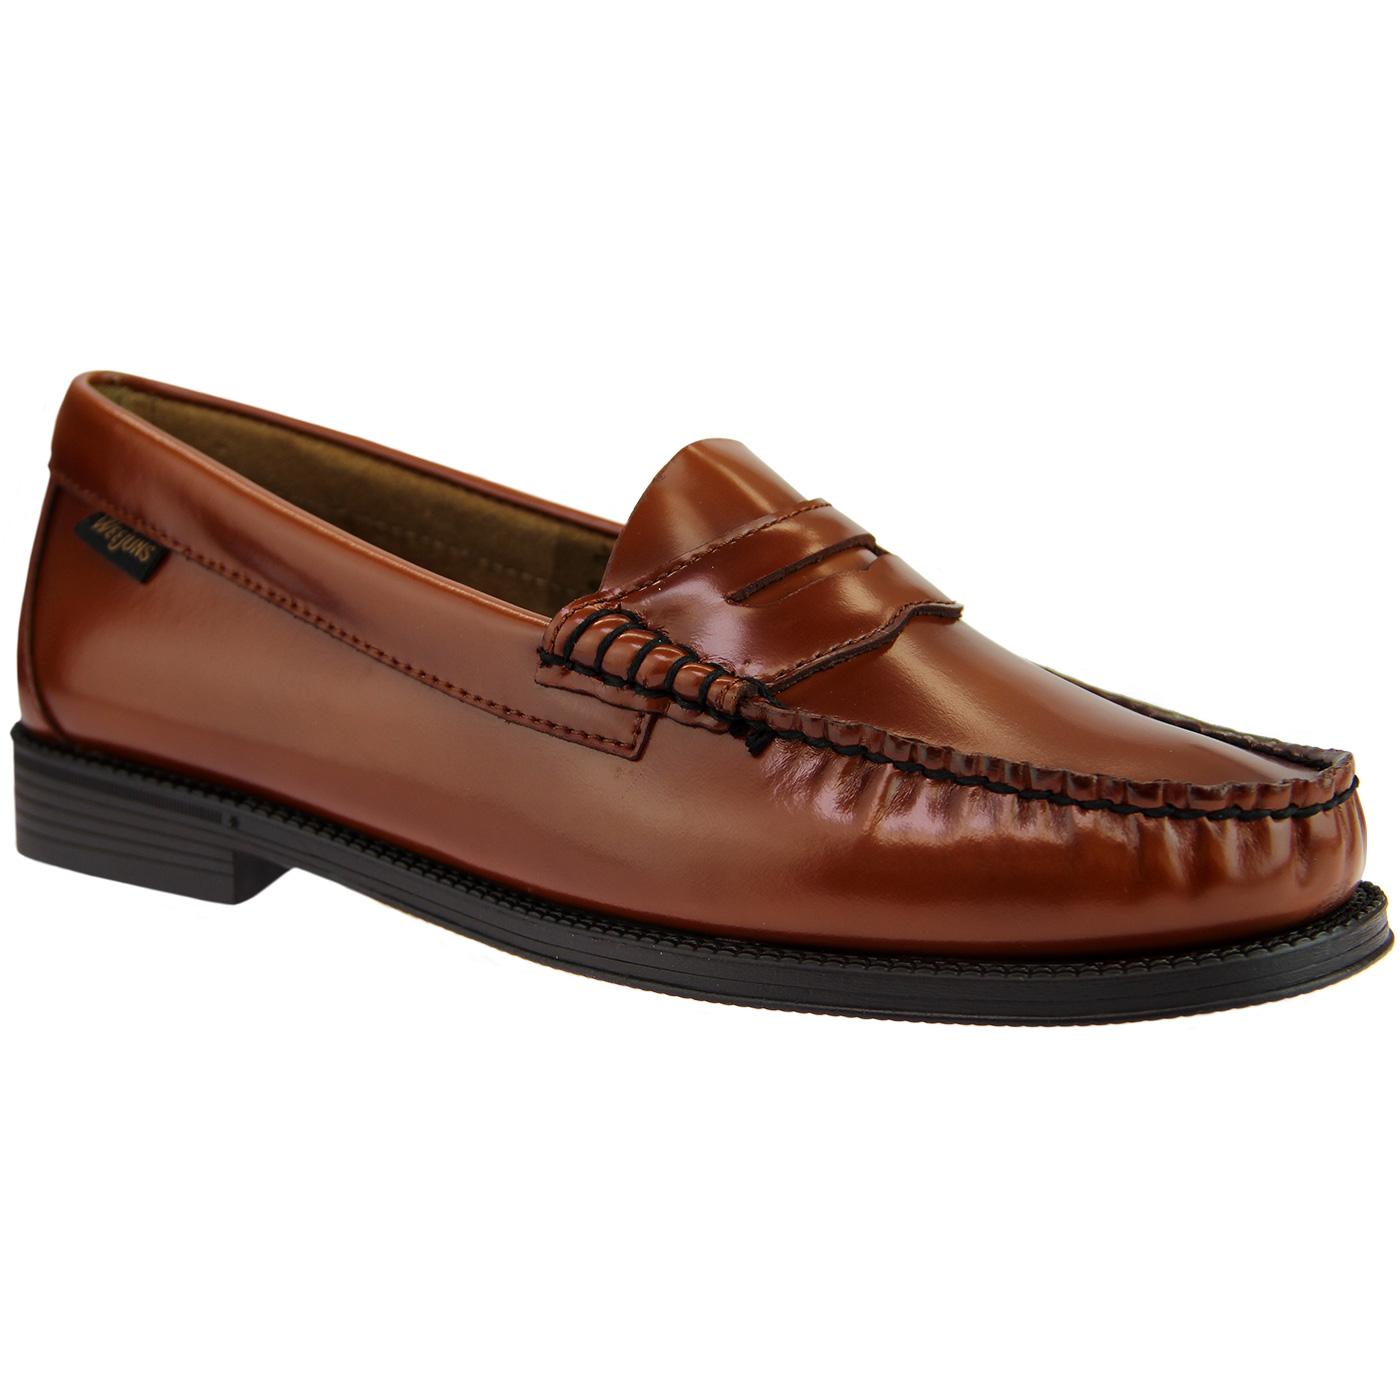 BASS WEEJUNS Women's Mod 60's Penny Loafers COGNAC